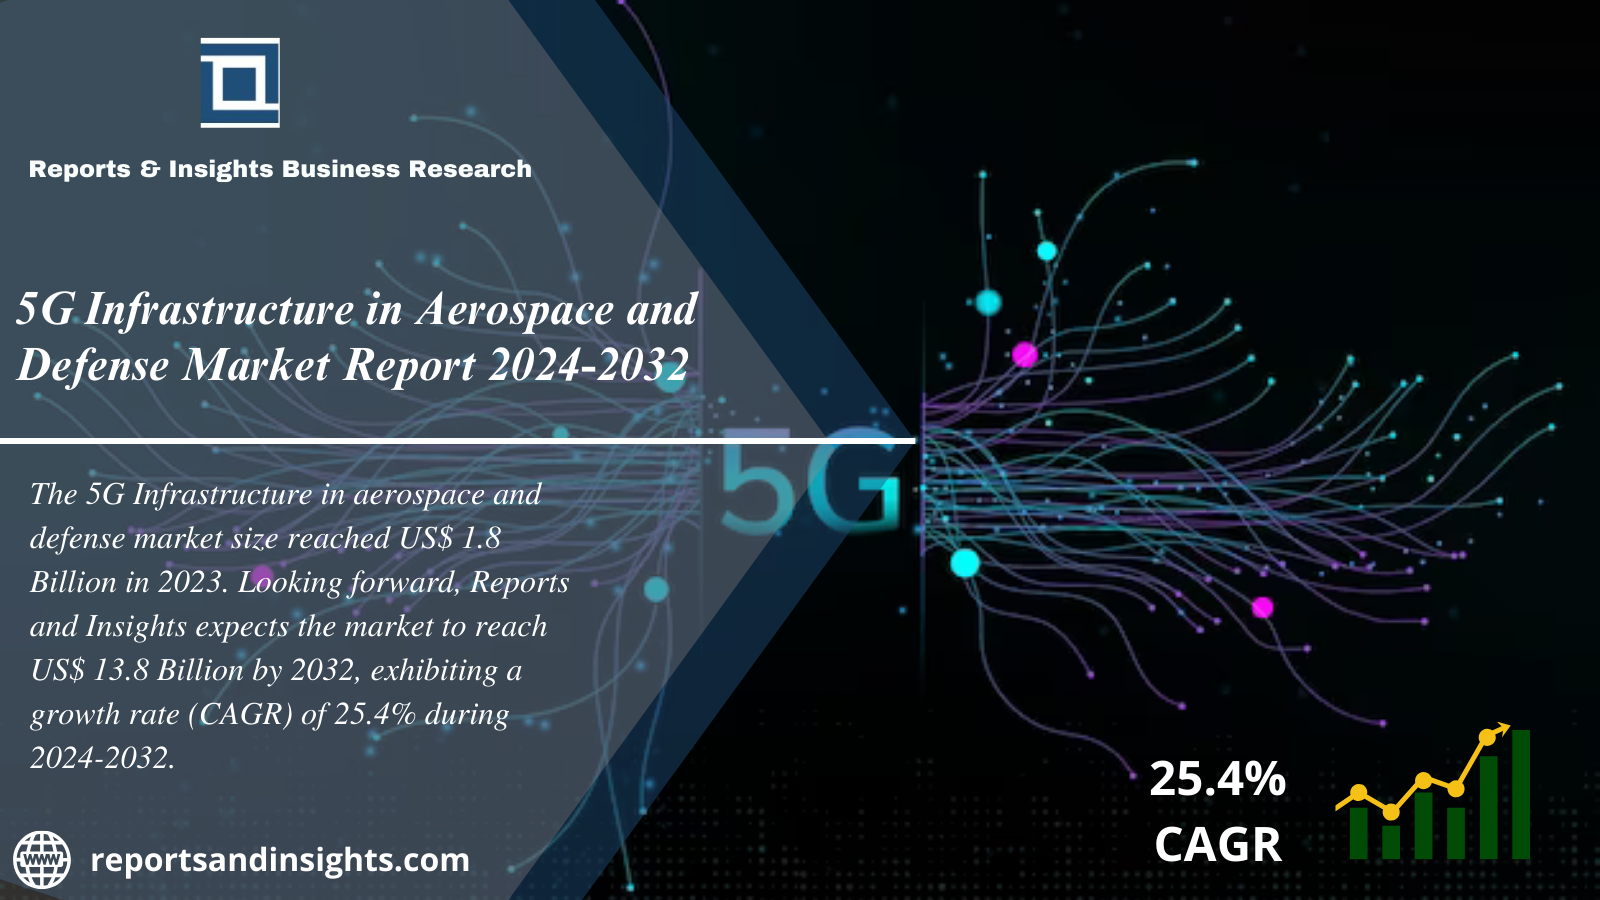 5G Infrastructure in Aerospace and Defense Market 2024 to 2032: Global Size, Share, Trends, Analysis and Research Report